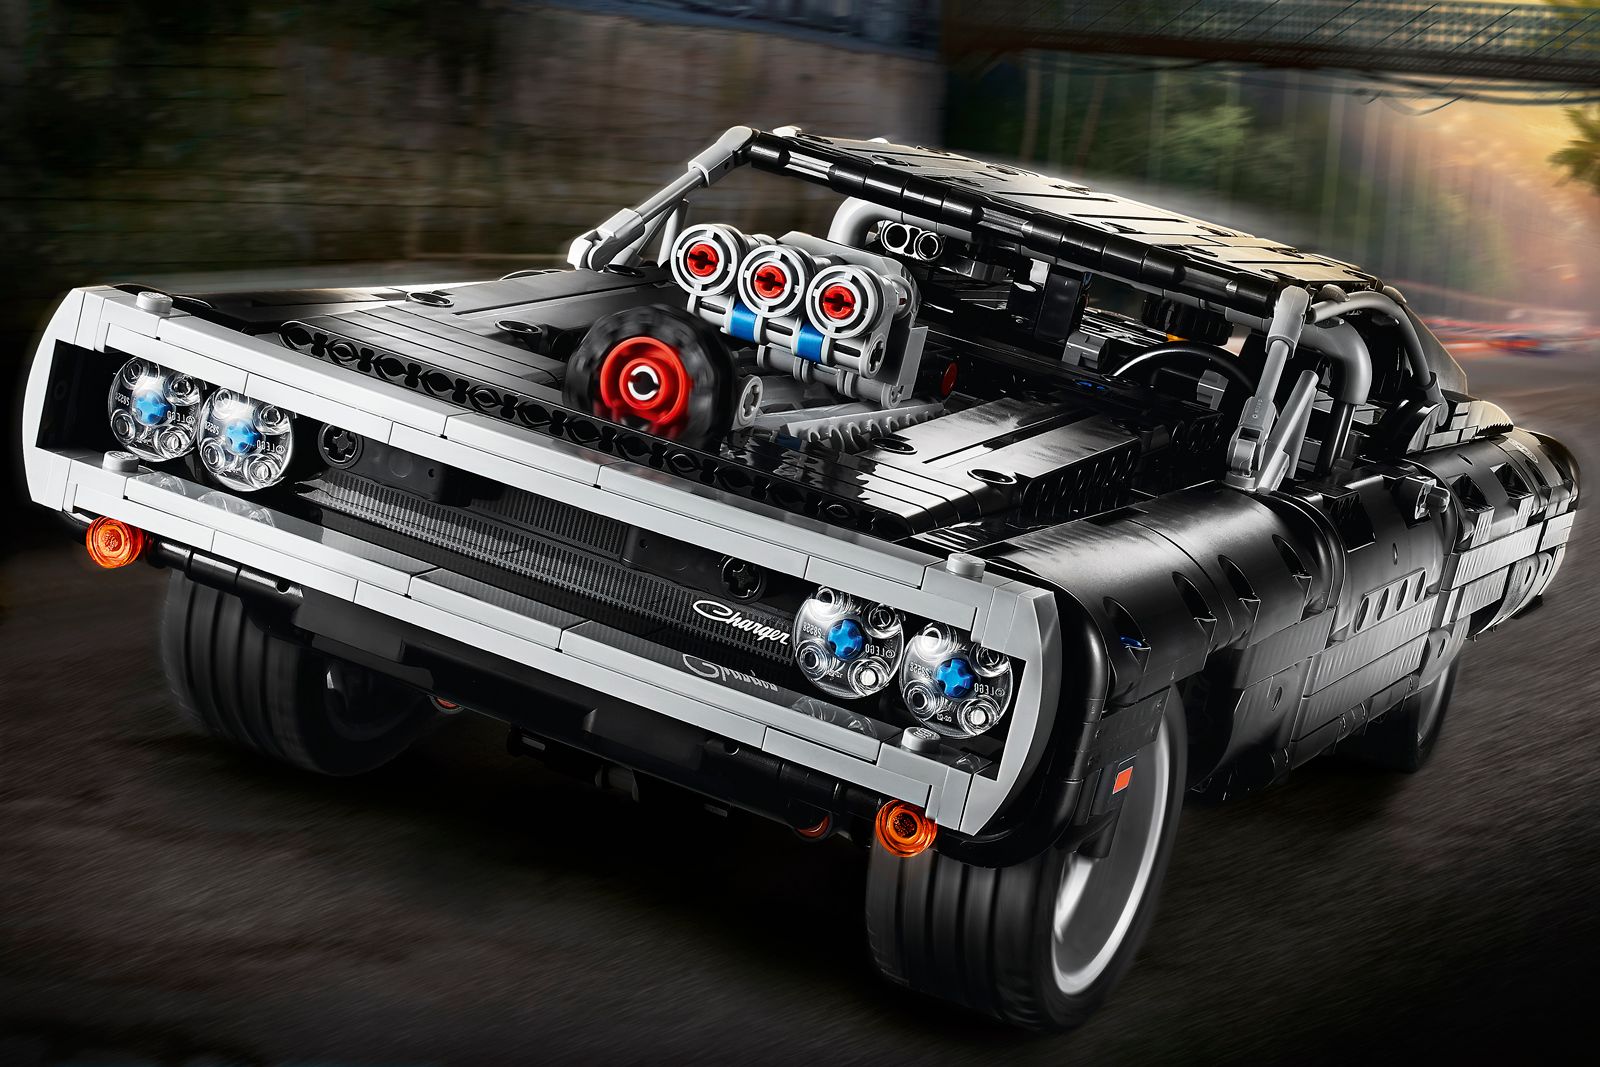 Dominic Toretto’s Fast and Furious Dodge Charger has been given the Lego Technic treatment image 1